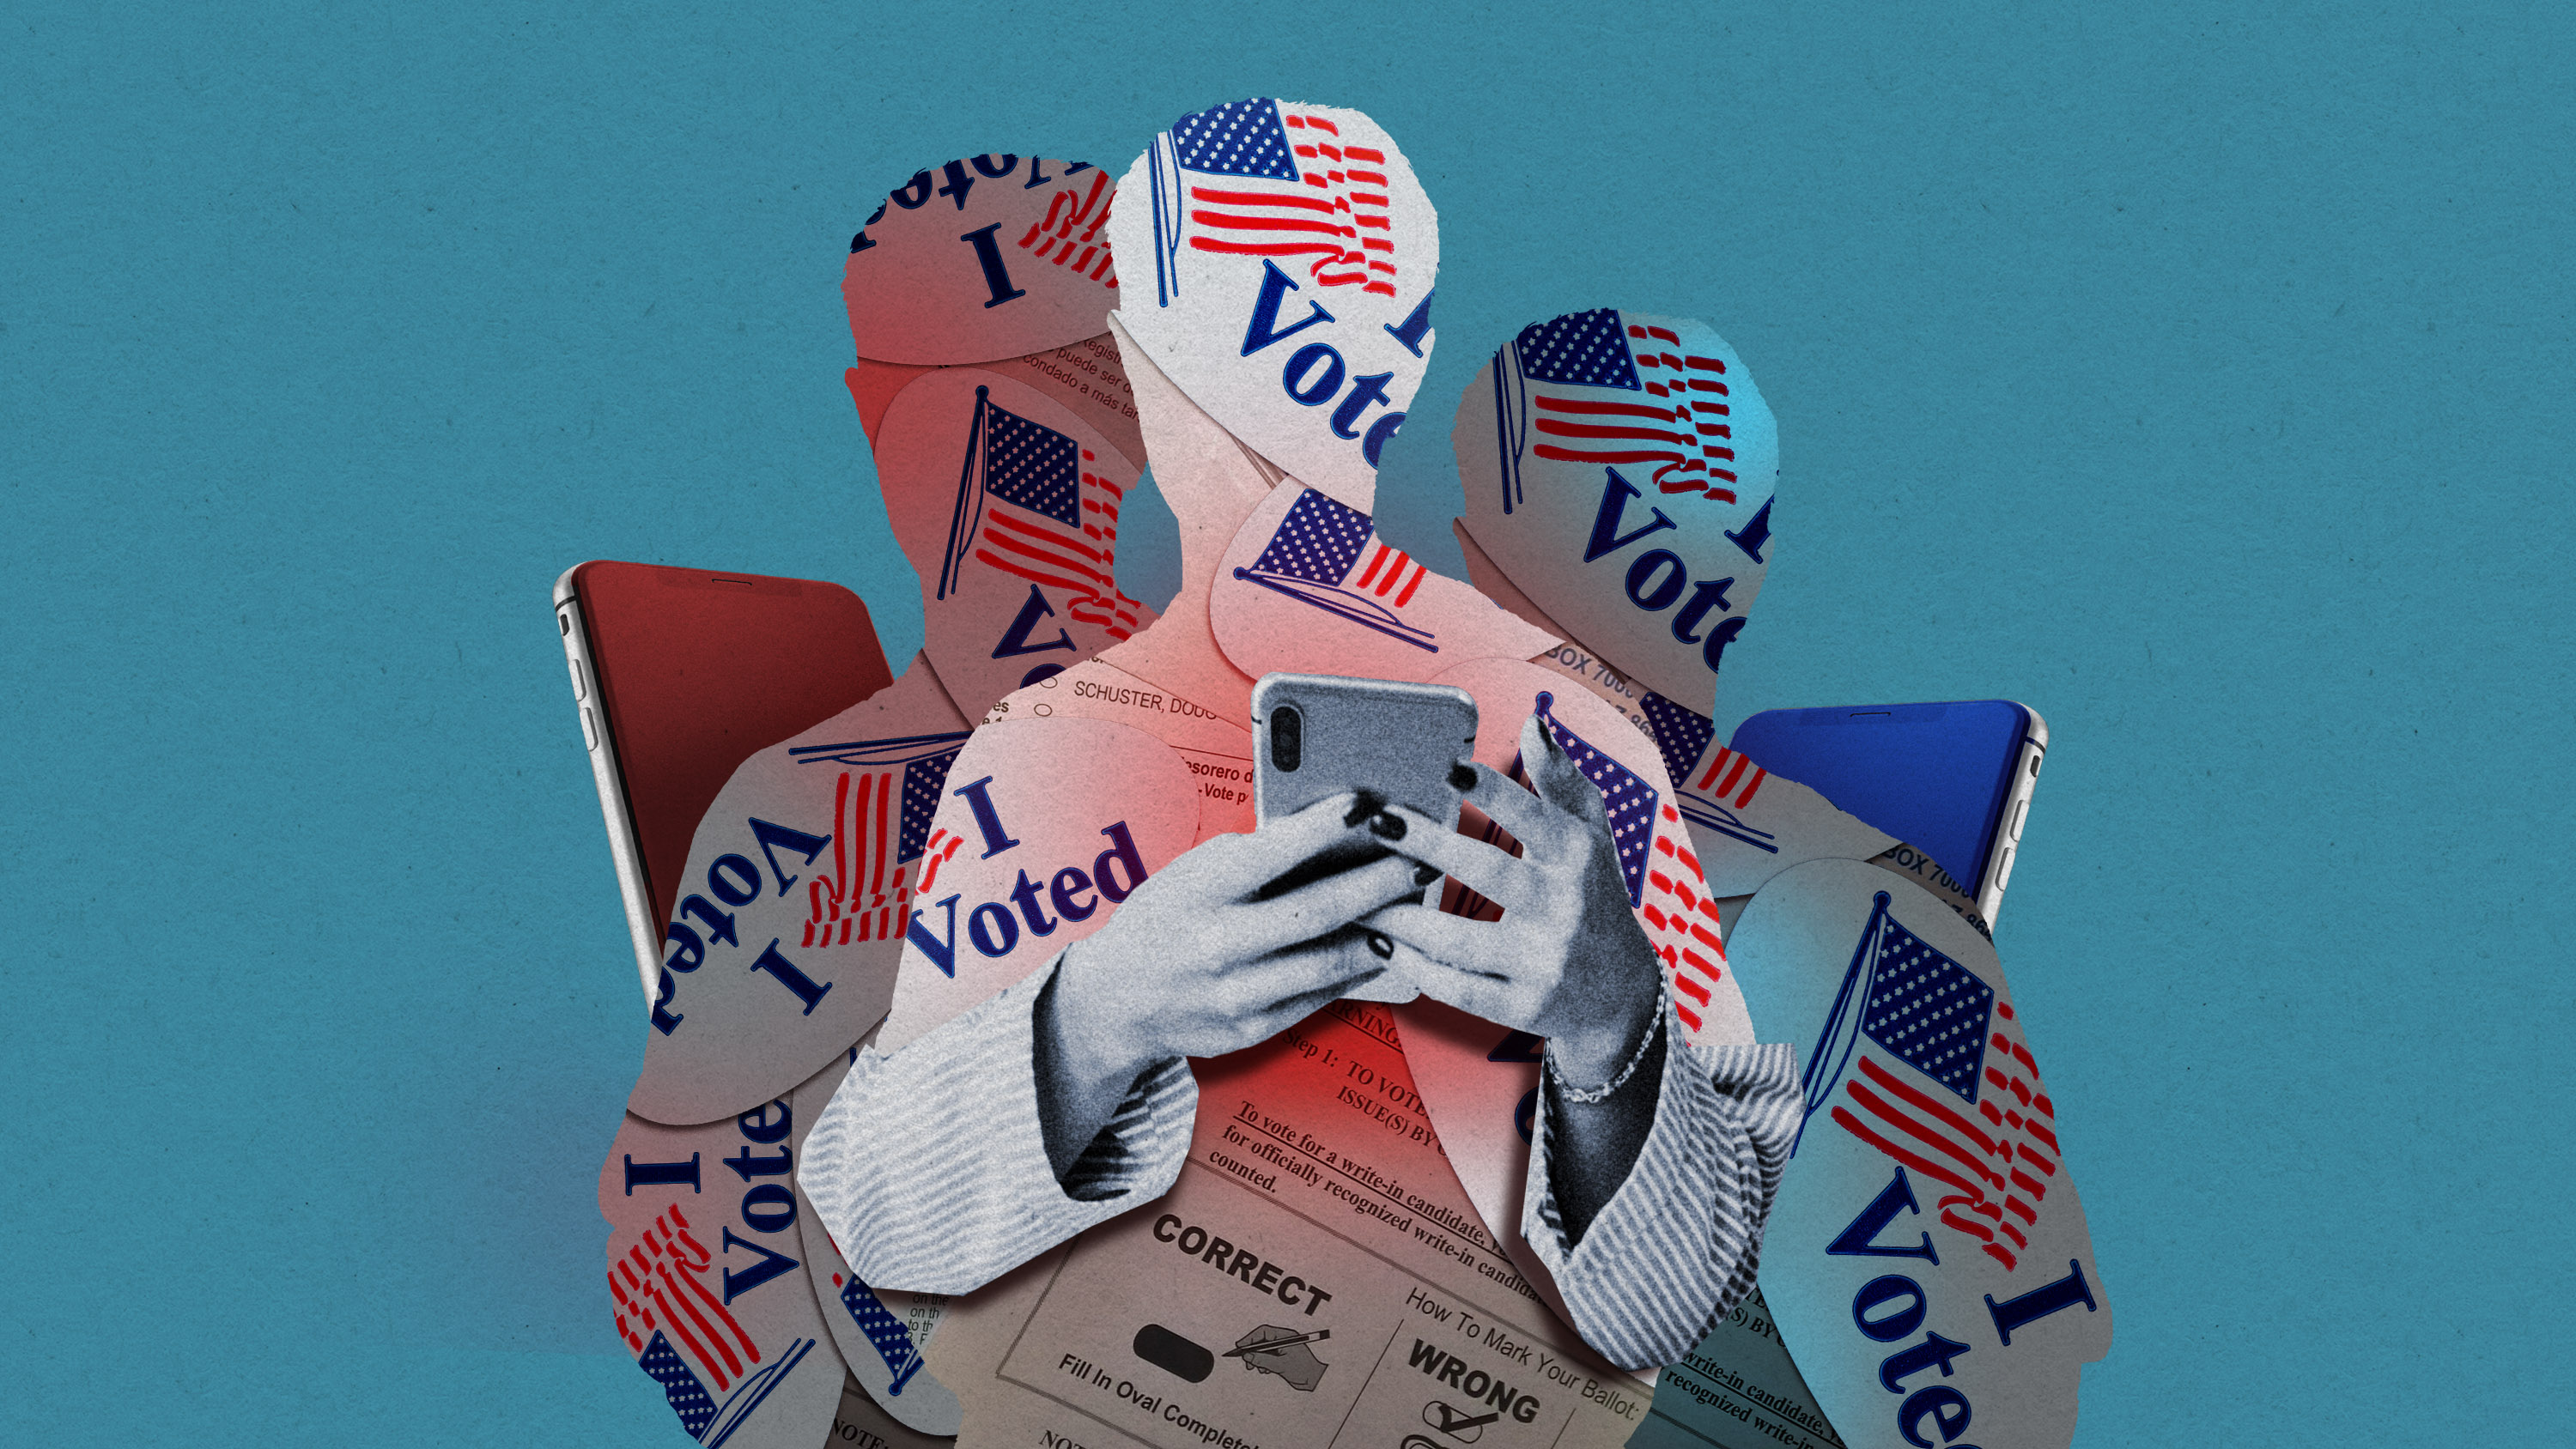 three figures covered in &quot;I Voted&quot; stickers lookat their phones which glow blue and red